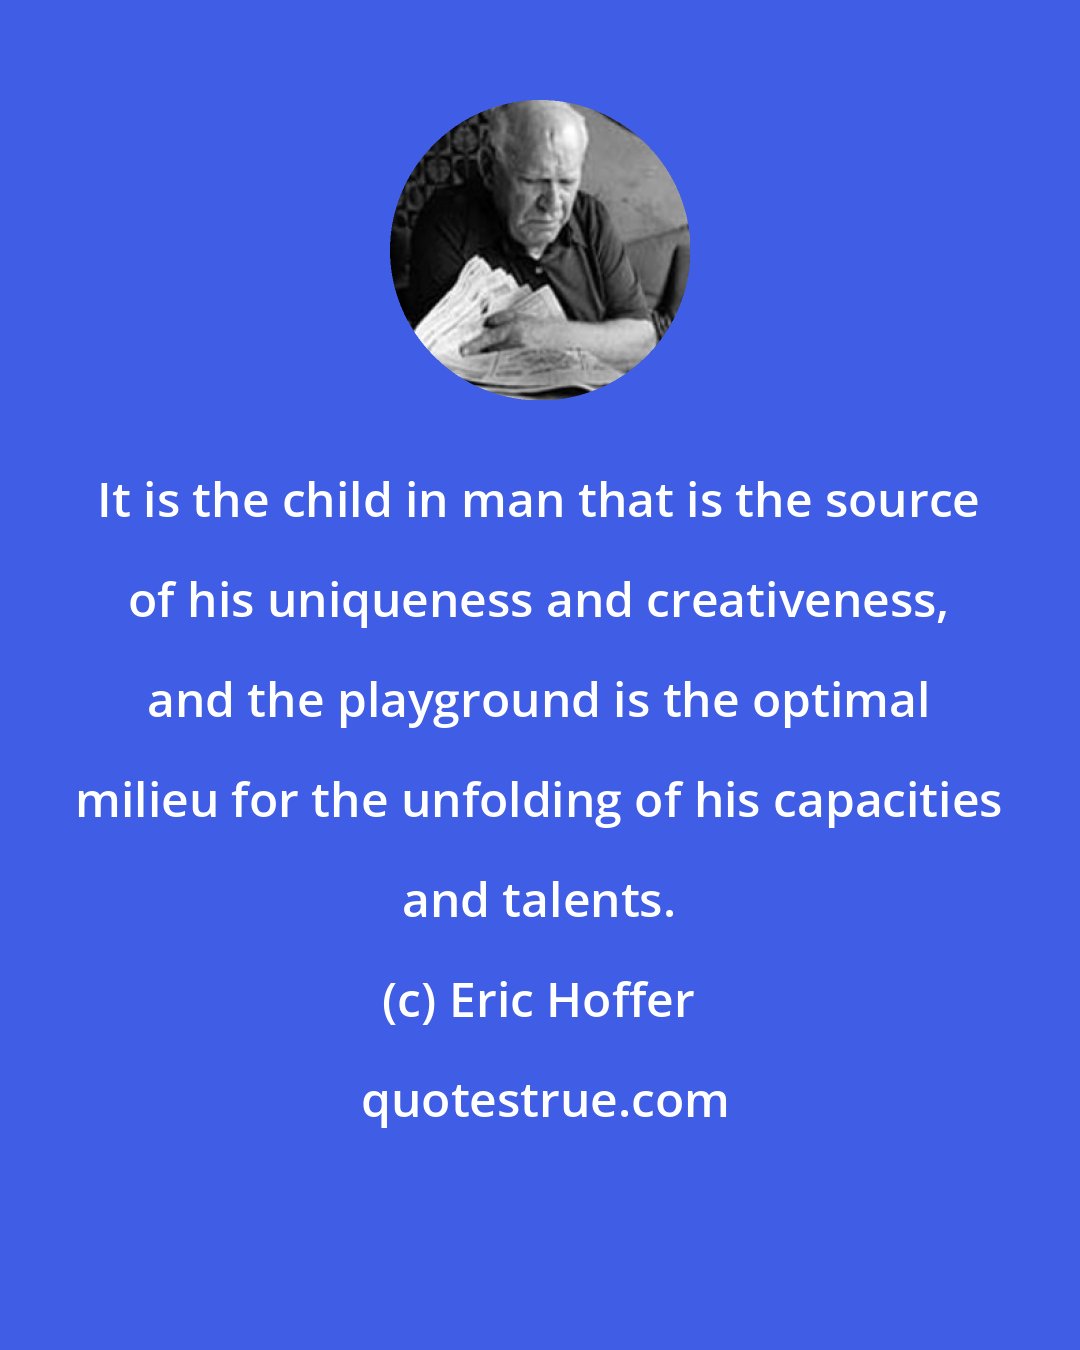 Eric Hoffer: It is the child in man that is the source of his uniqueness and creativeness, and the playground is the optimal milieu for the unfolding of his capacities and talents.